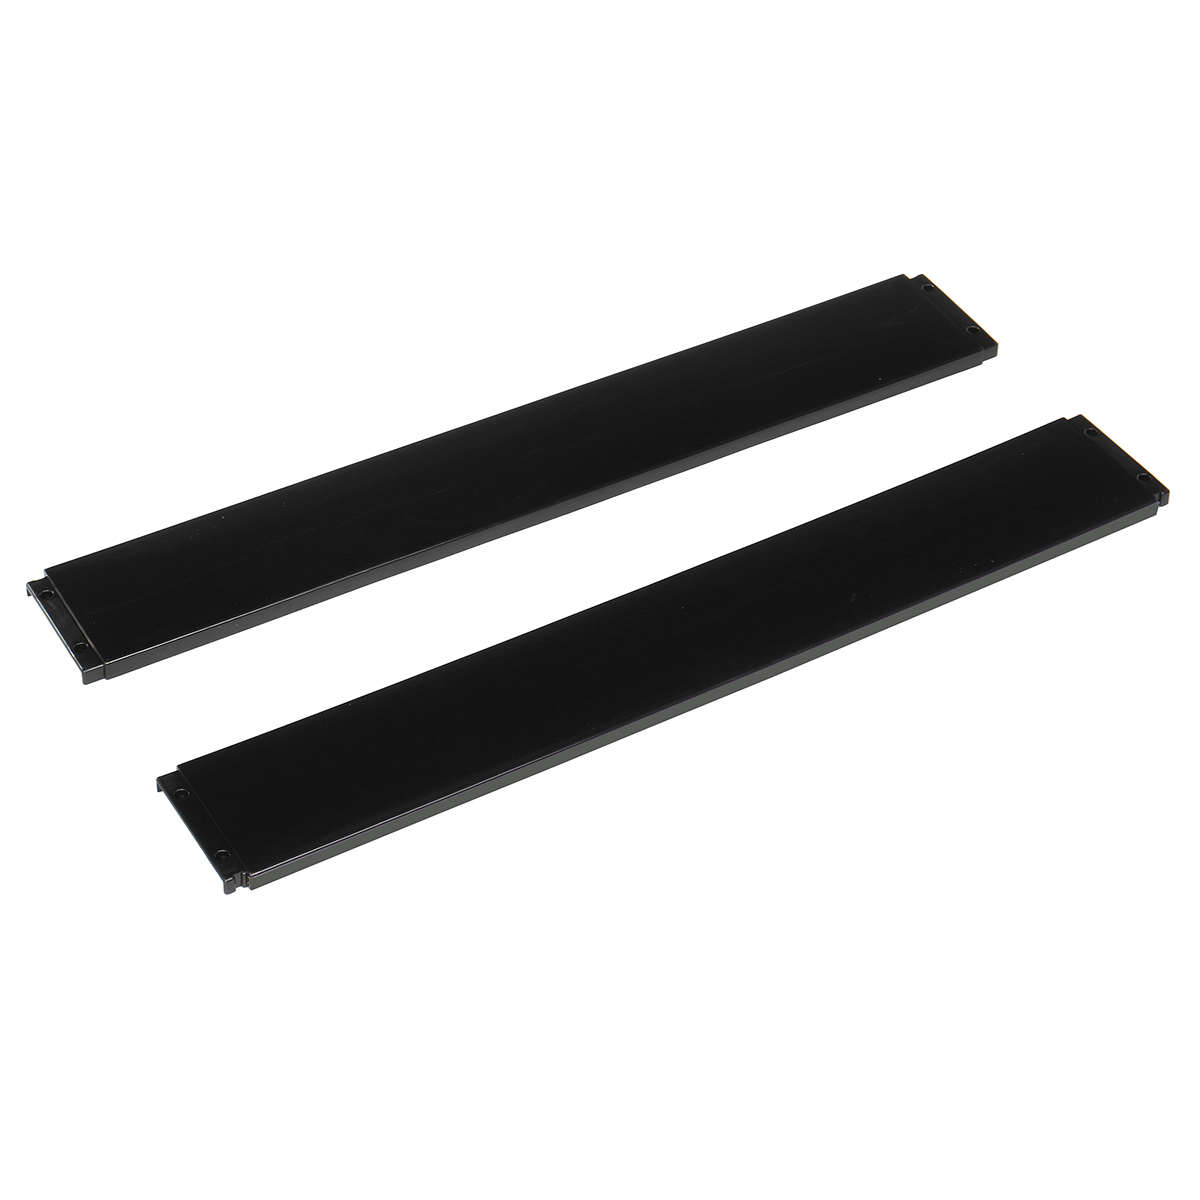 Find 2.2M / 86.6inch Black Modified Three-section Side Skirts Extension Rocker Panel For Chrysler 300 SRT All Models for Sale on Gipsybee.com with cryptocurrencies